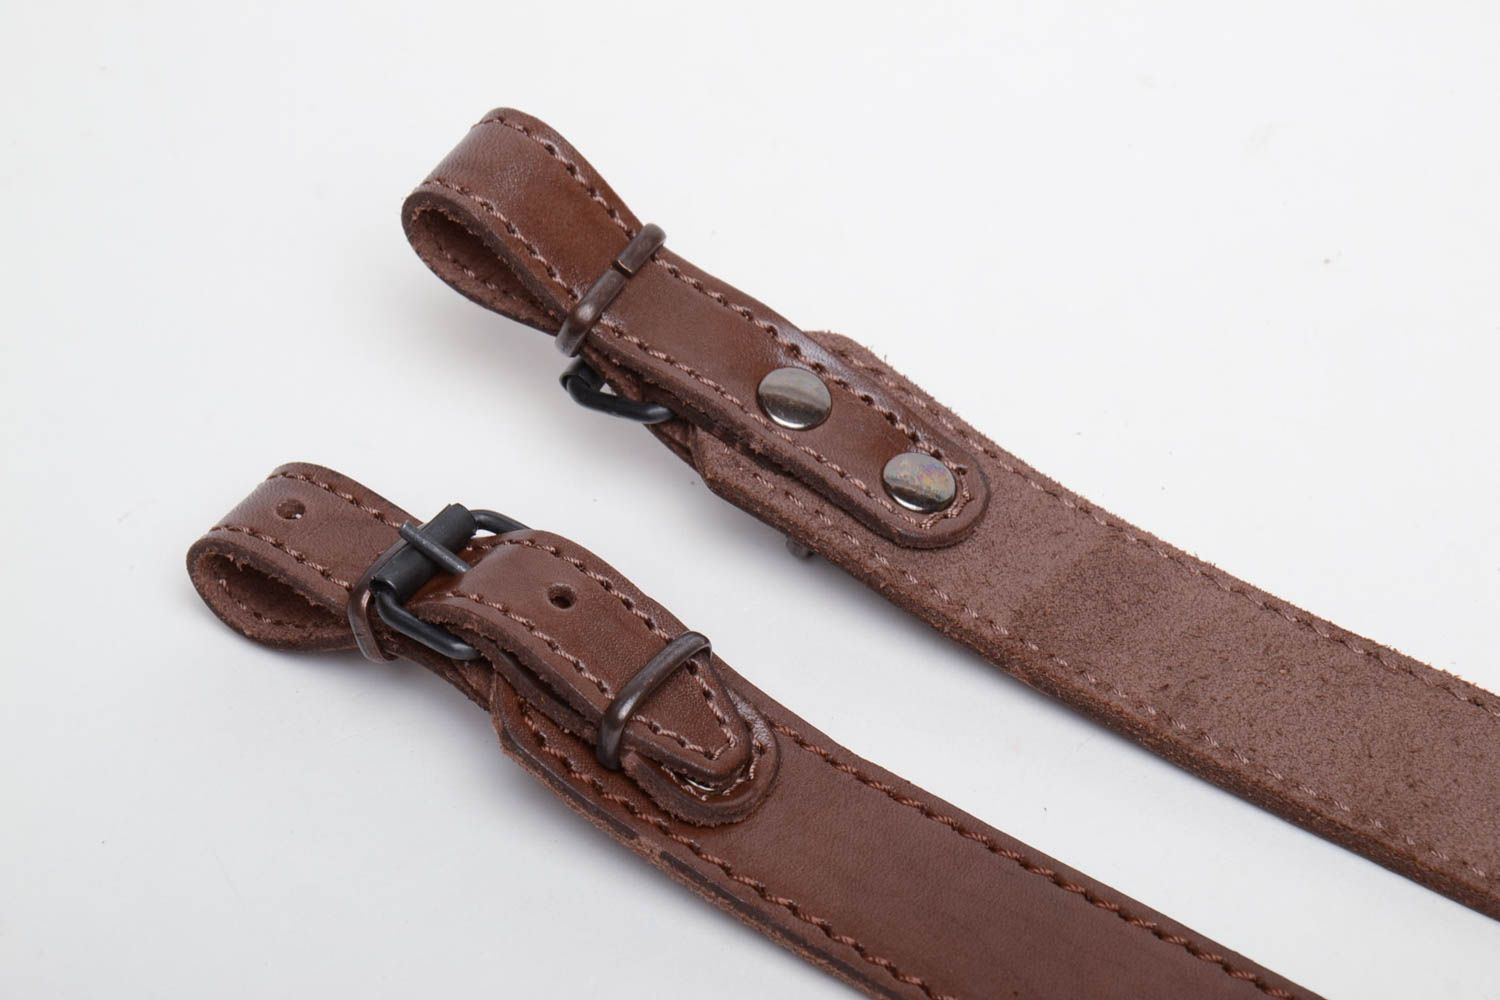 Woven leather rifle sling photo 4